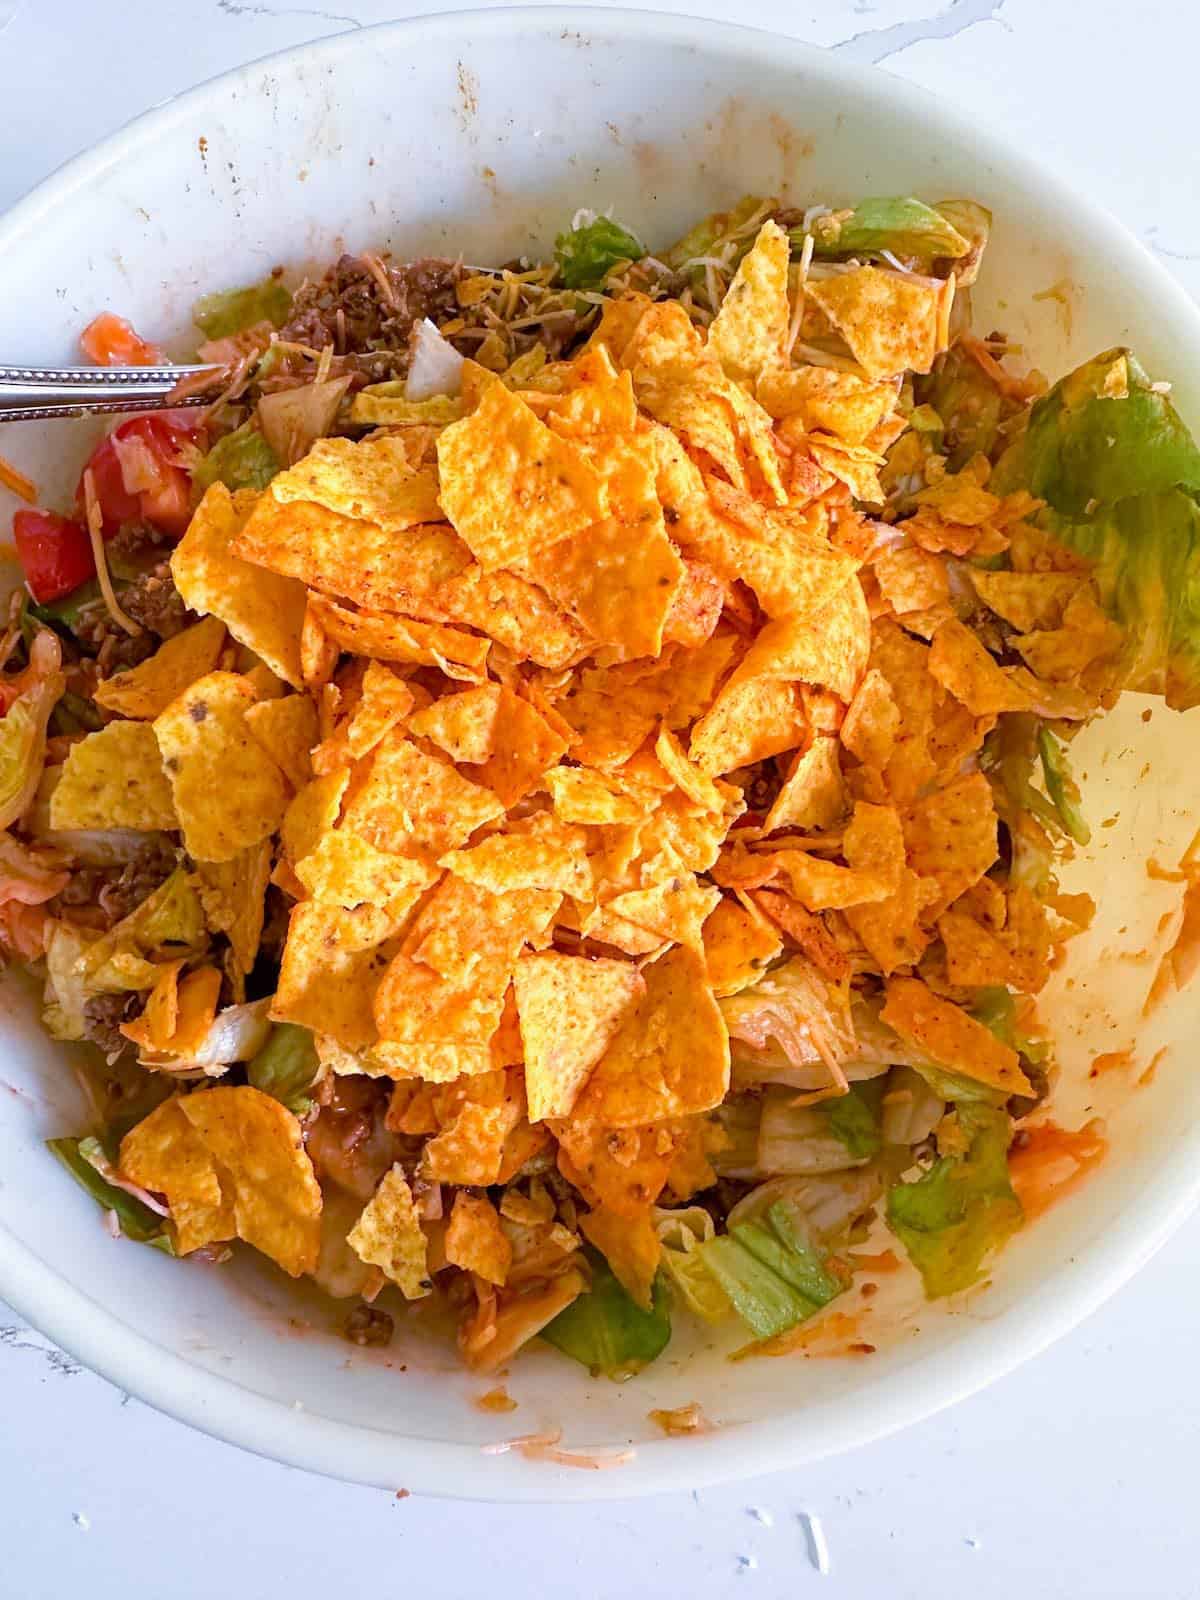 Crushed nacho chips on top of a taco salad.